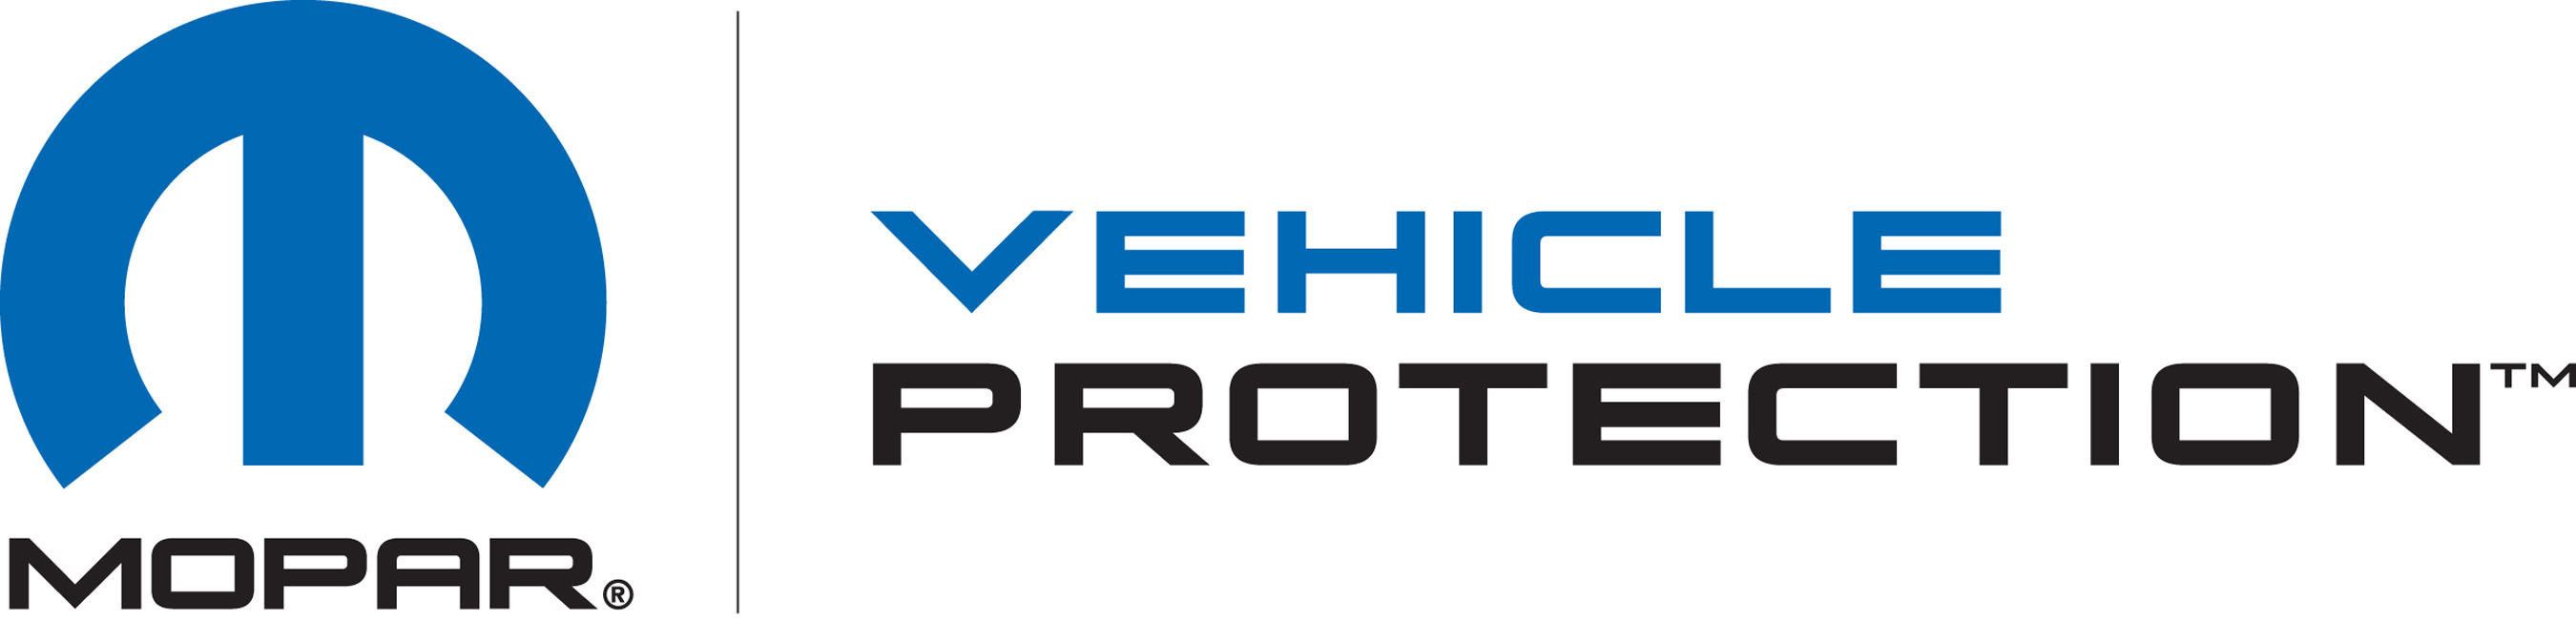 Mopar Vehicle Protection plans offer extra vehicle coverage in tough winter conditions.